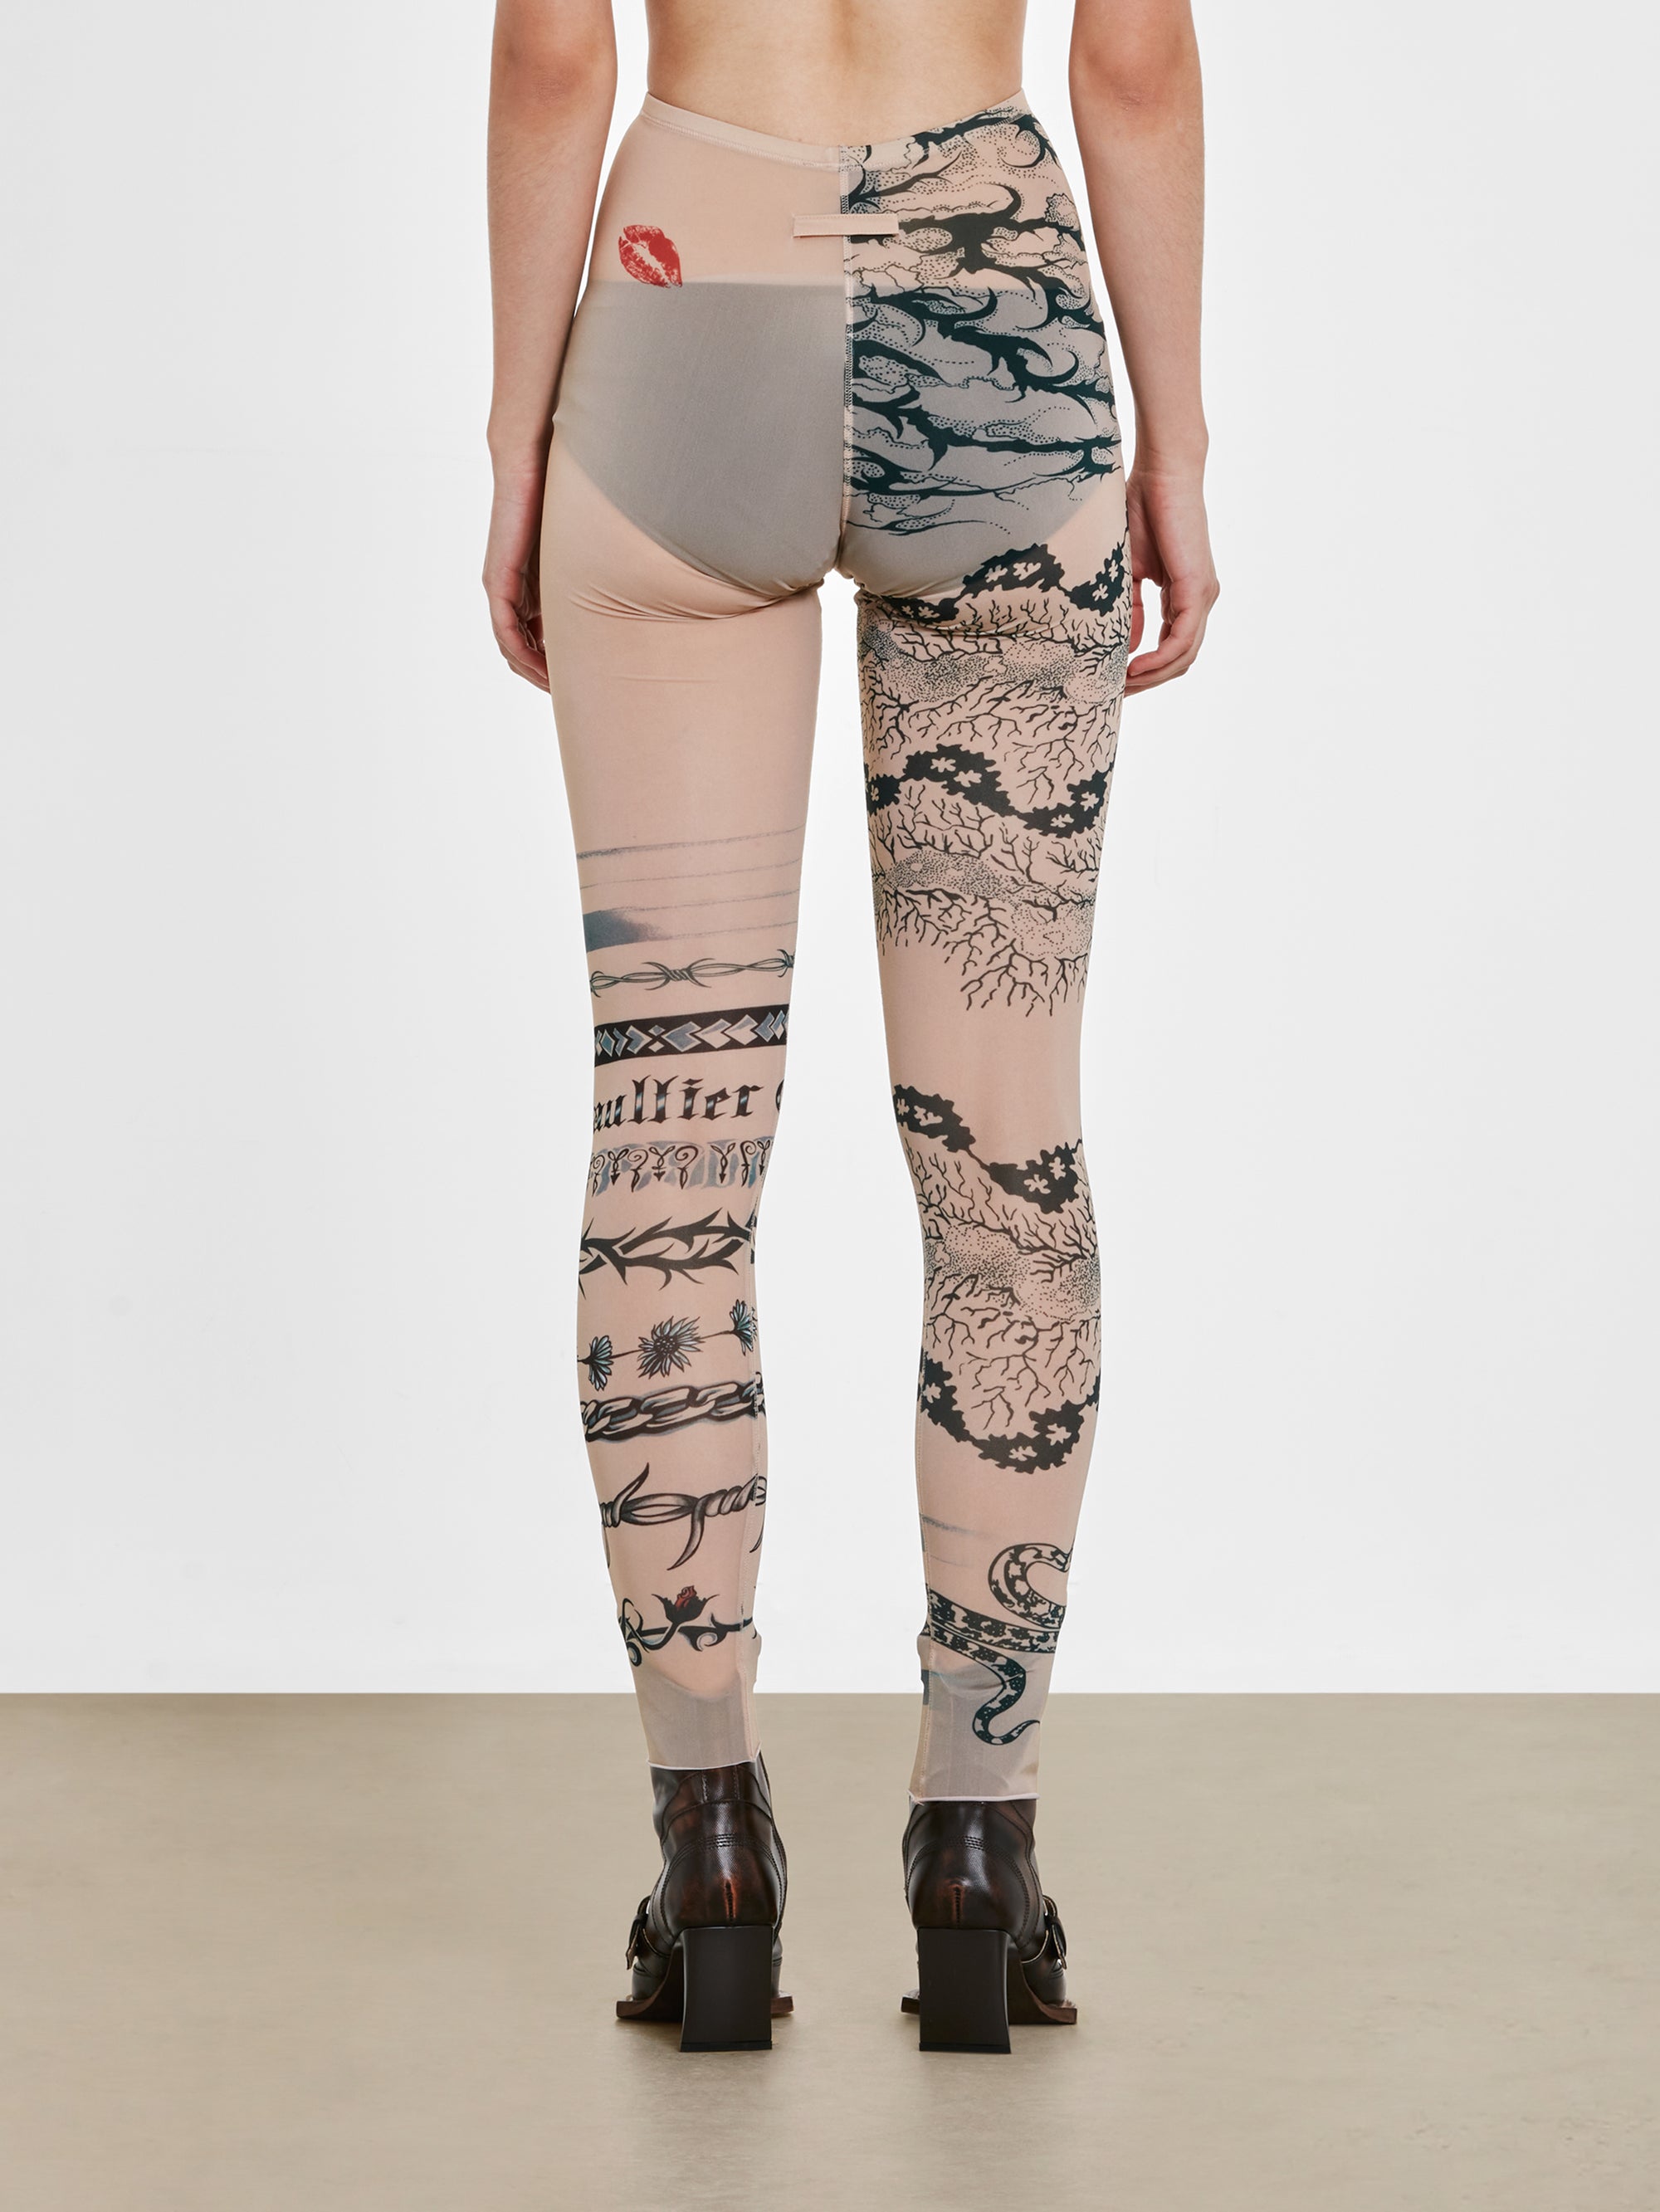 Jean Paul Gaultier X KNWLS Leggings Printed Trompe l'oeil Tattoo – Antidote  Fashion and Lifestyle